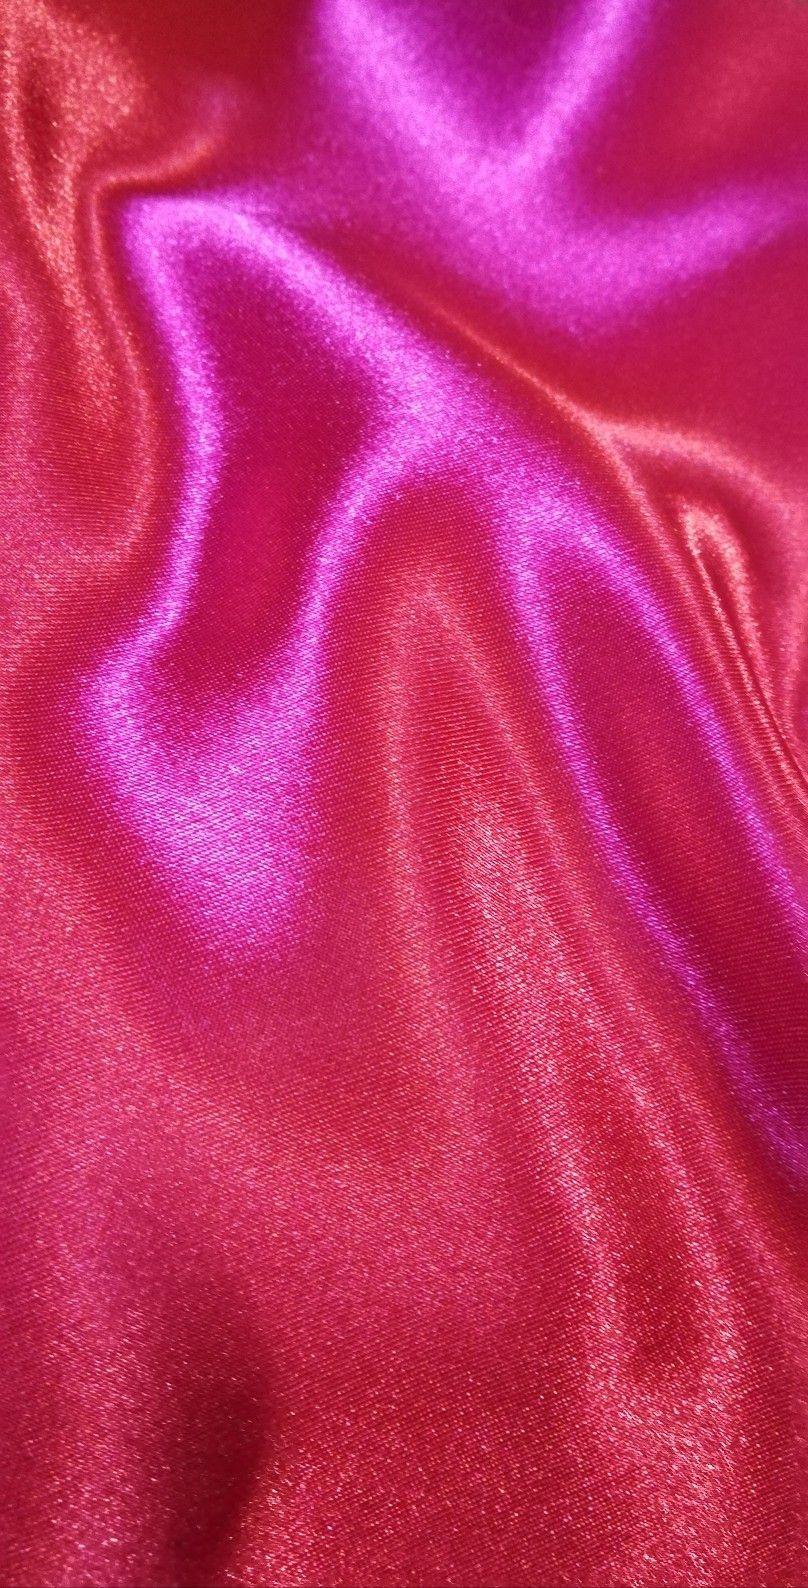 A close up of a pink and purple metallic fabric. - Silk